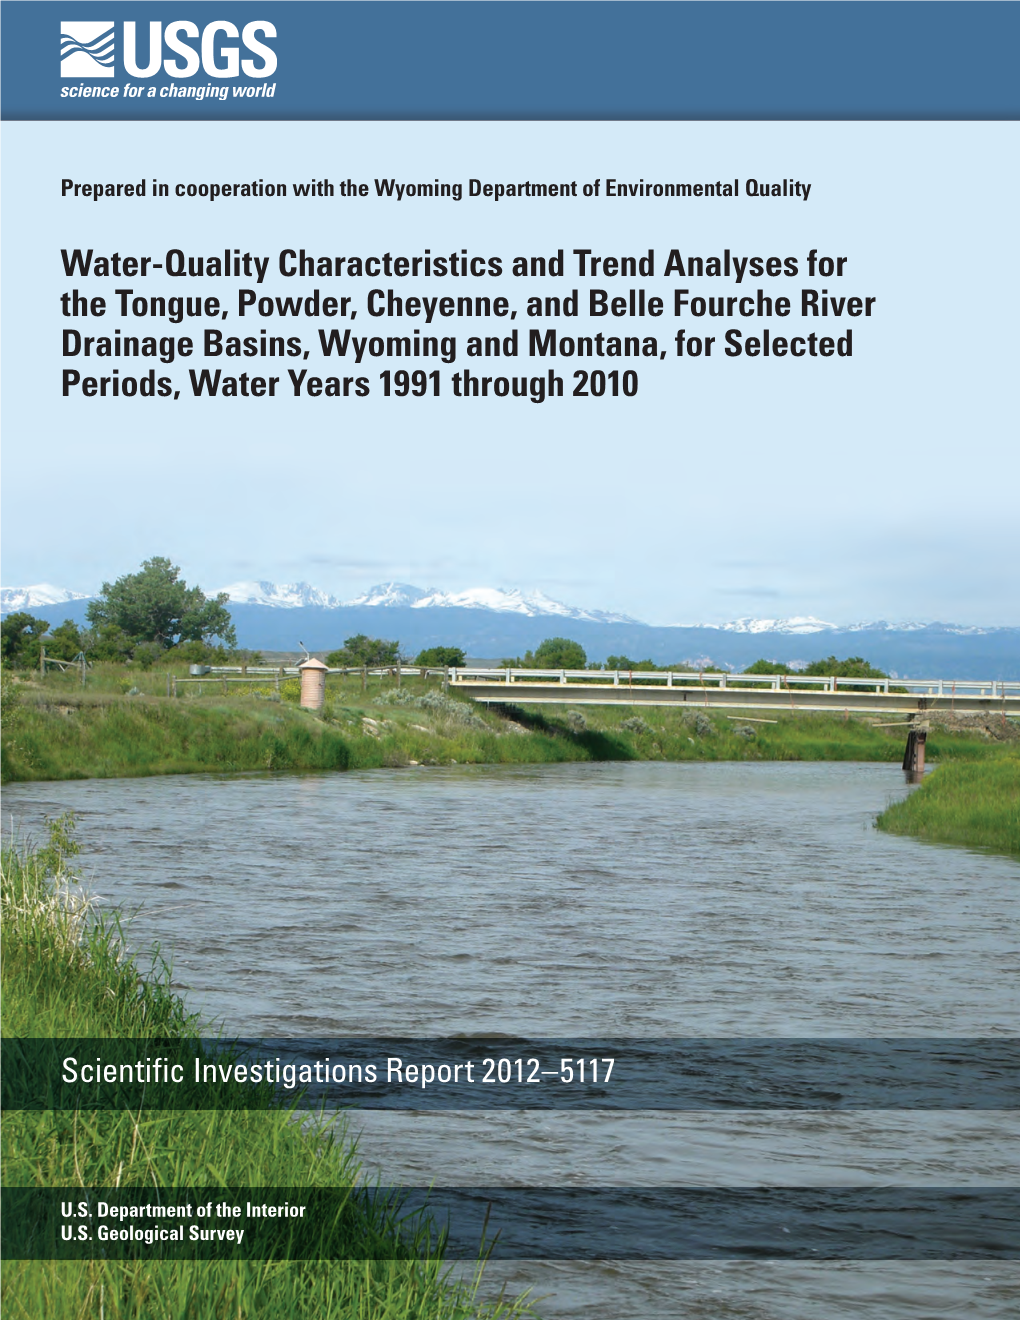 Water-Quality Characteristics and Trend Analyses for the Tongue, Powder, Cheyenne, and Belle Fourche River Drainage Basins, Wyom